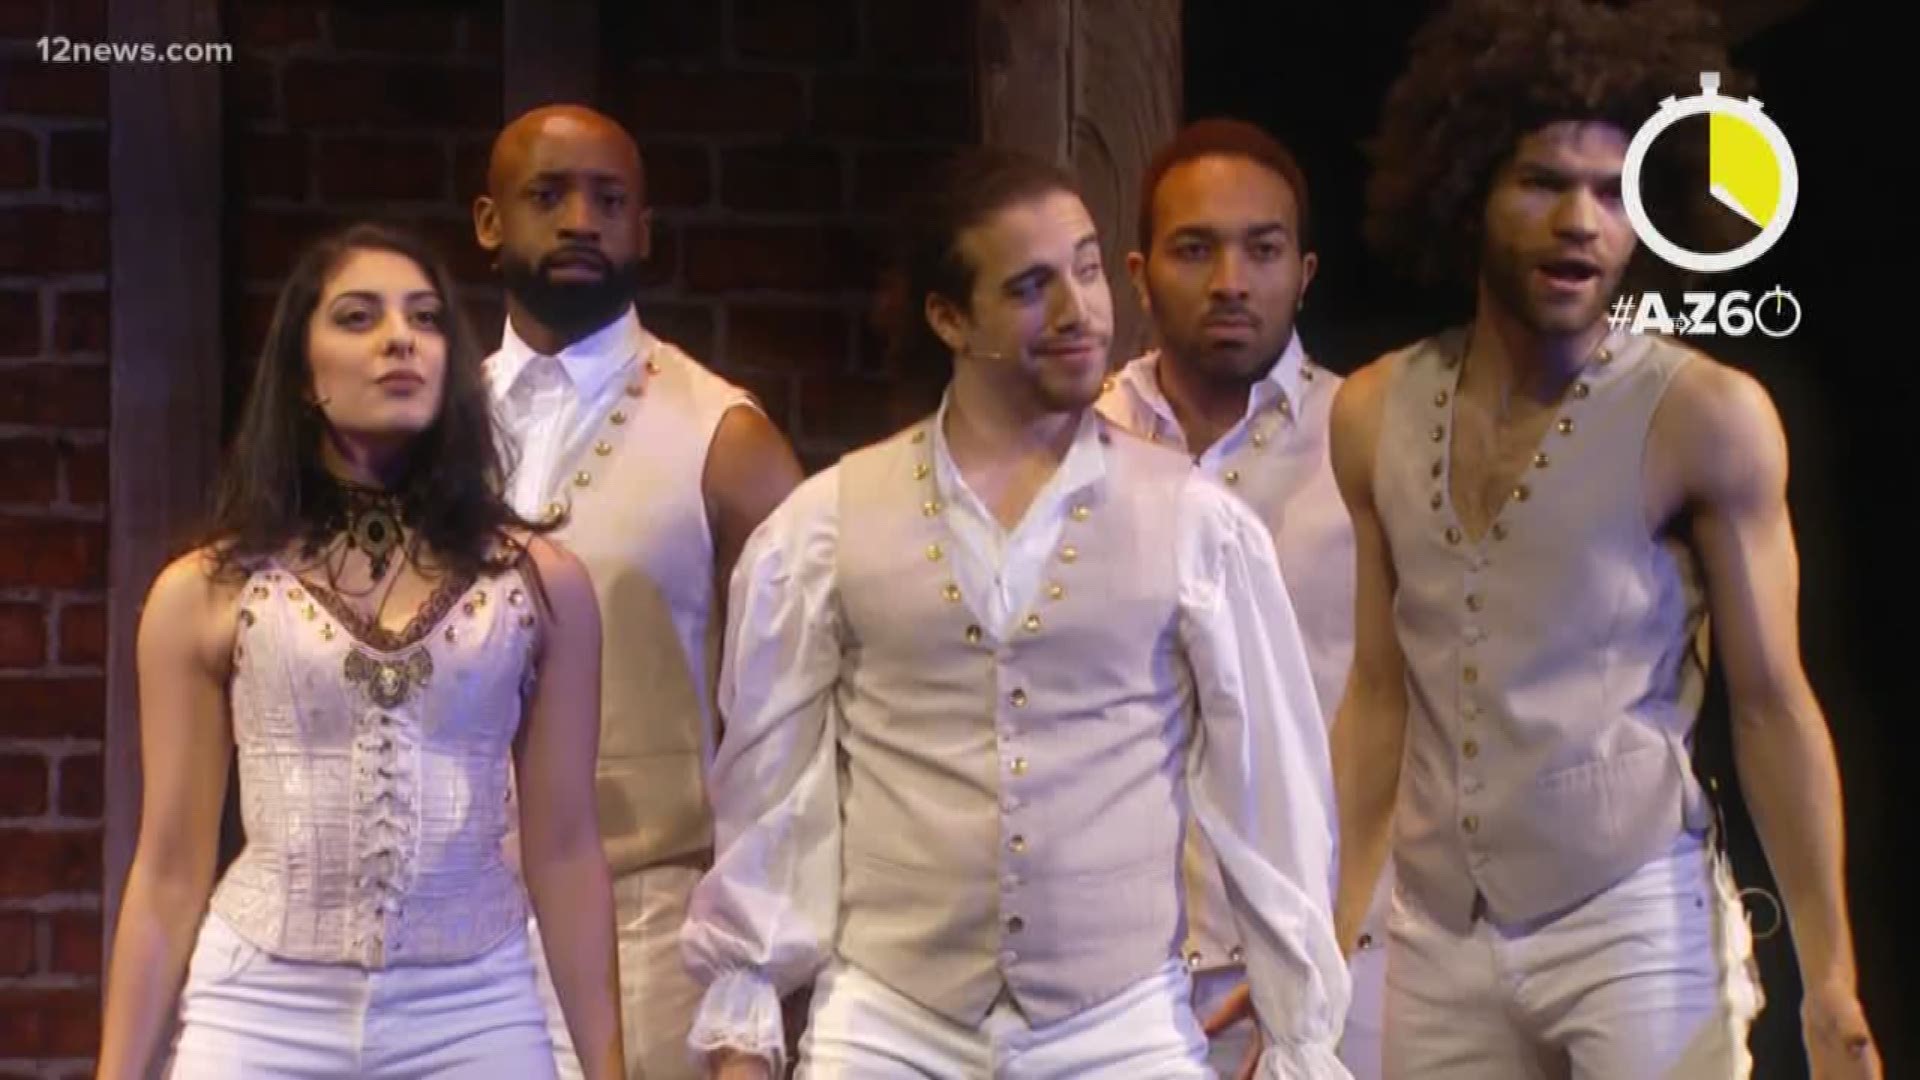 You've heard about "Hamilton," but what about "Spamilton"? Jen Wahl gives us a peek at the new show at the Phoenix Theatre Company.